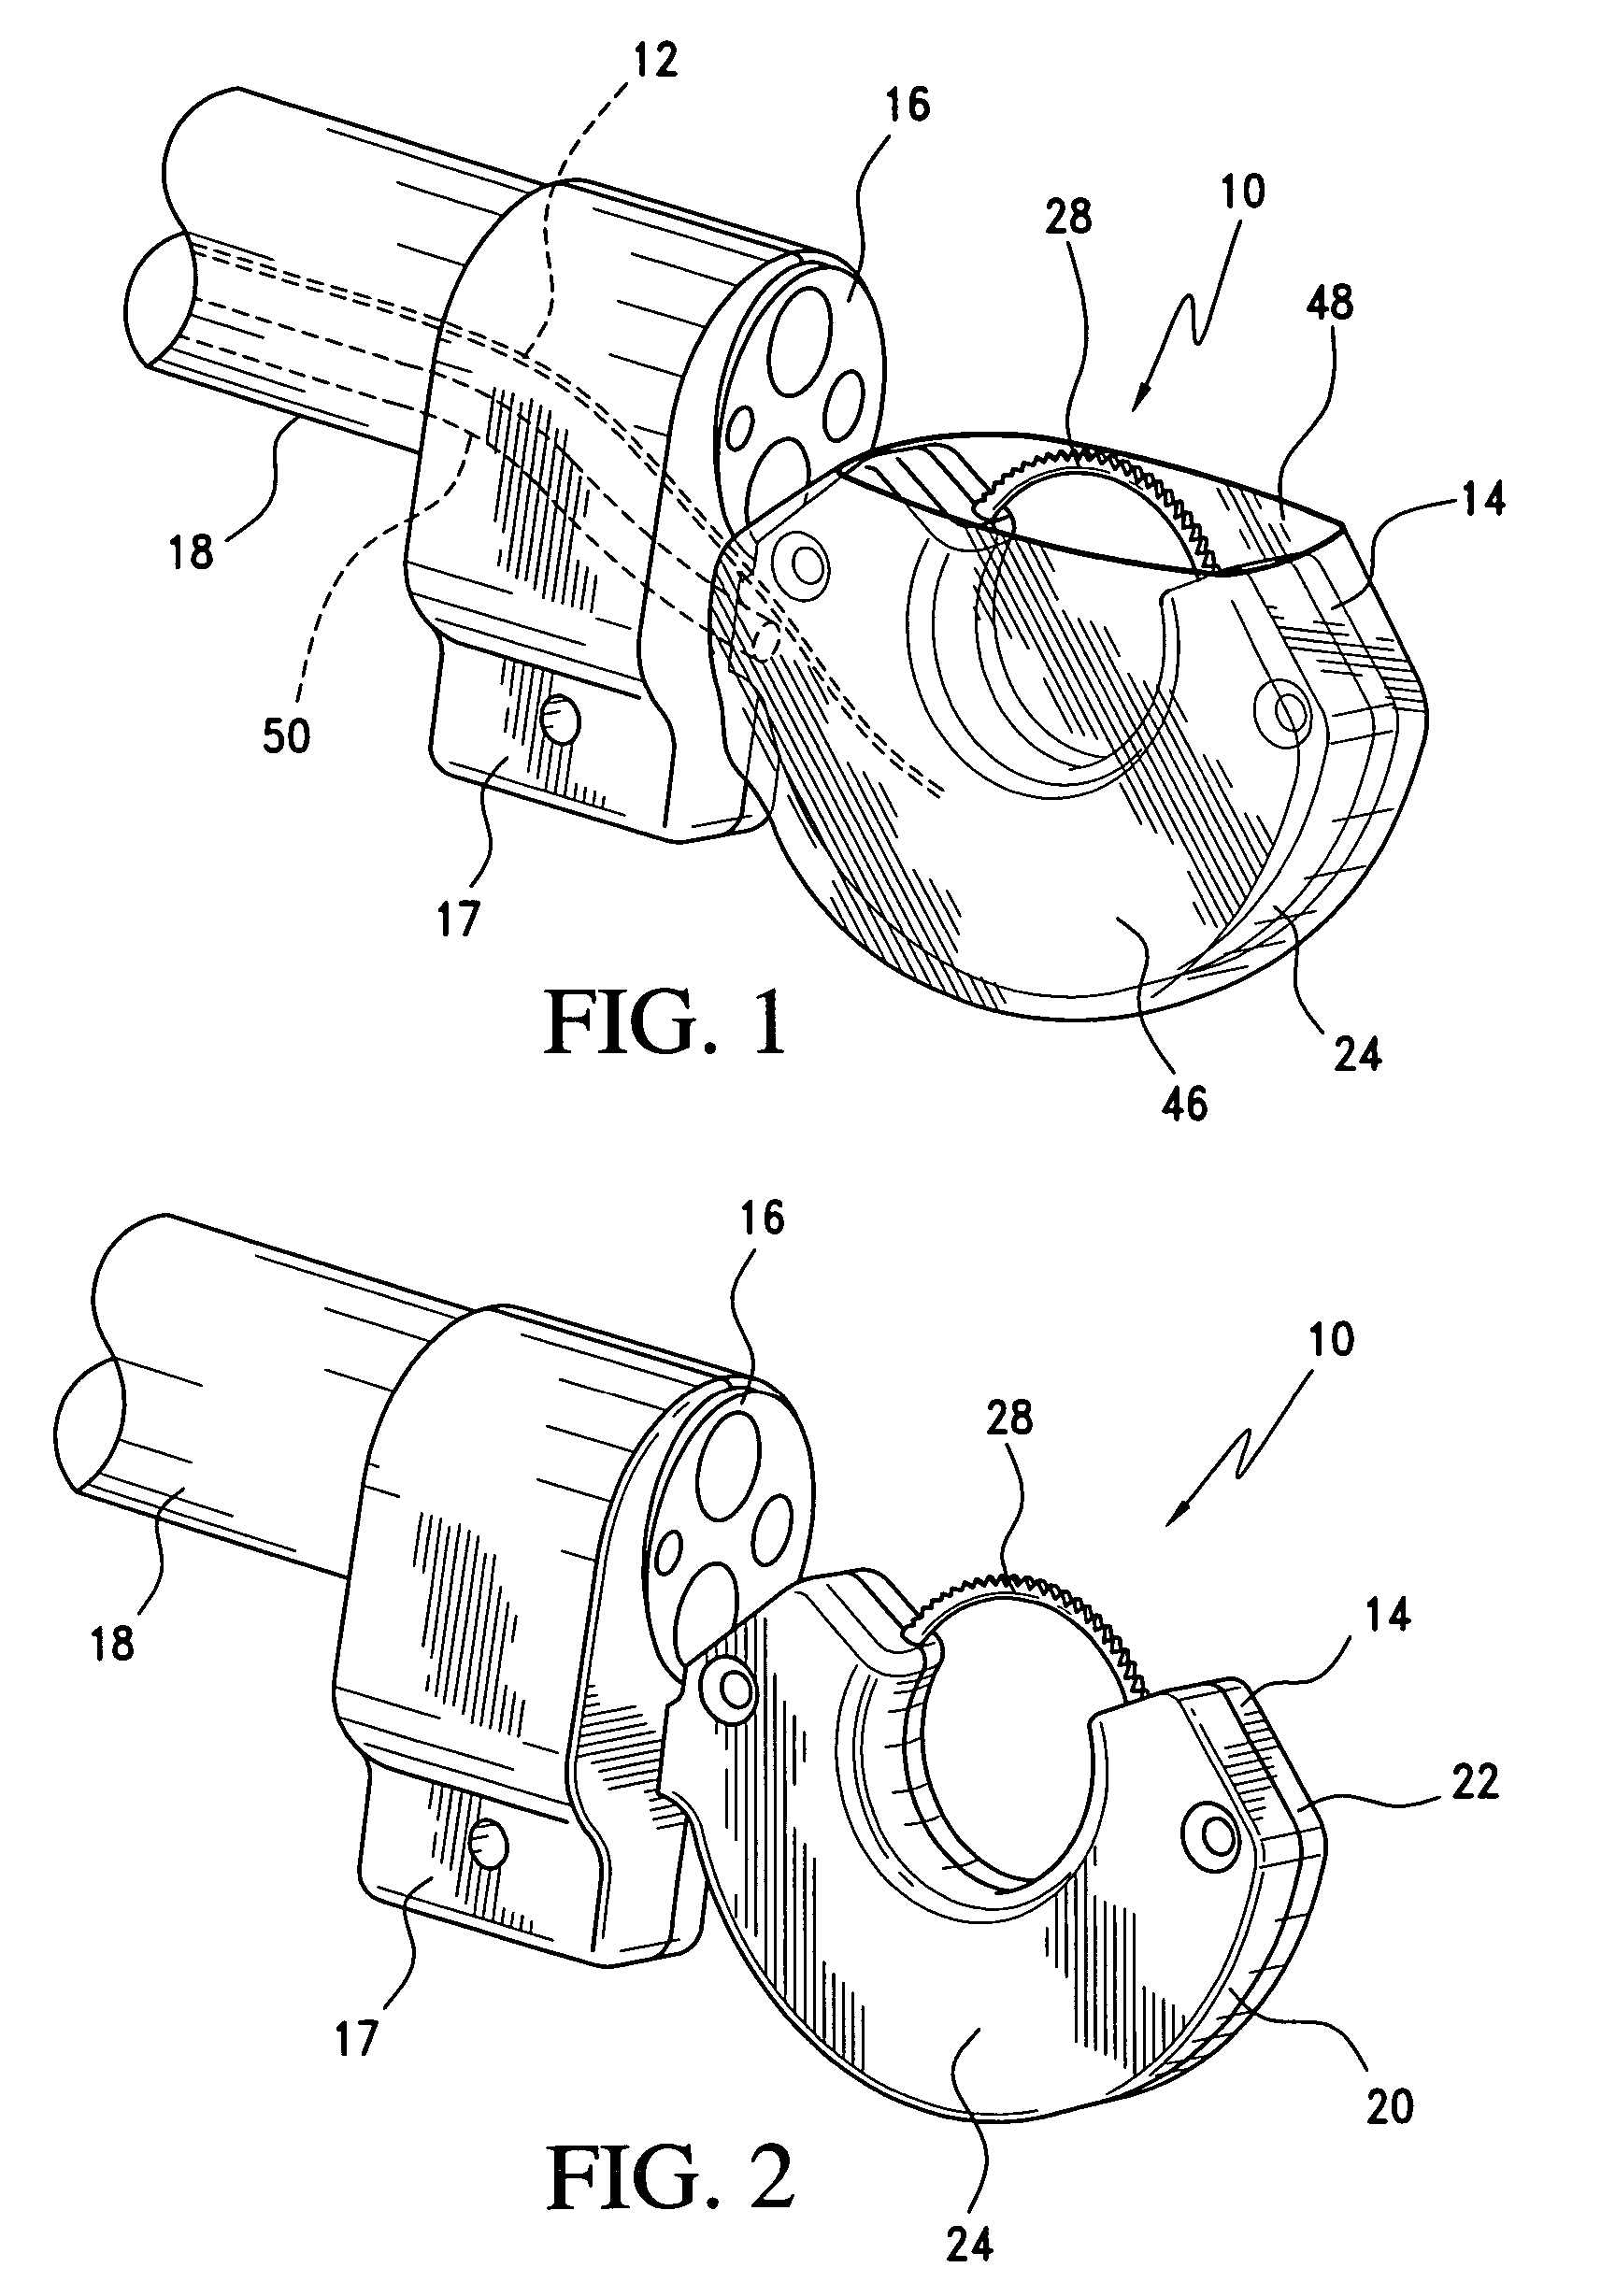 Surgical suturing apparatus with anti-backup system